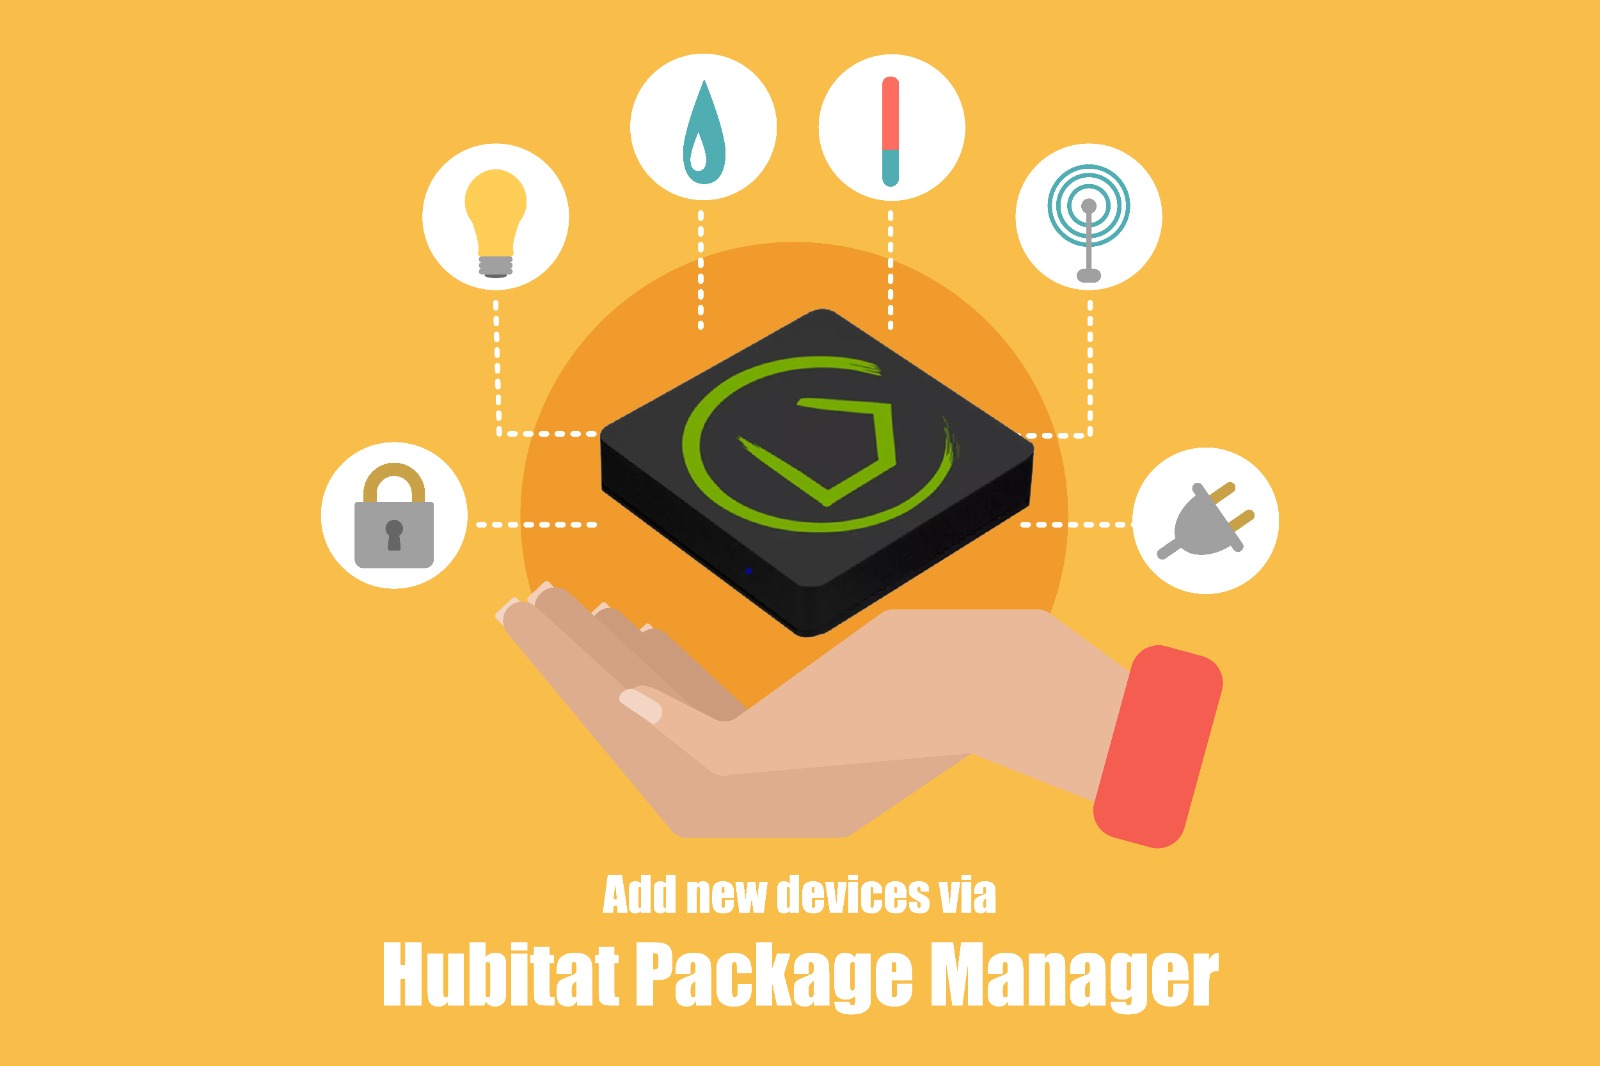 Use Hubitat Package Manager to Make New Devices Compatible with the Hub